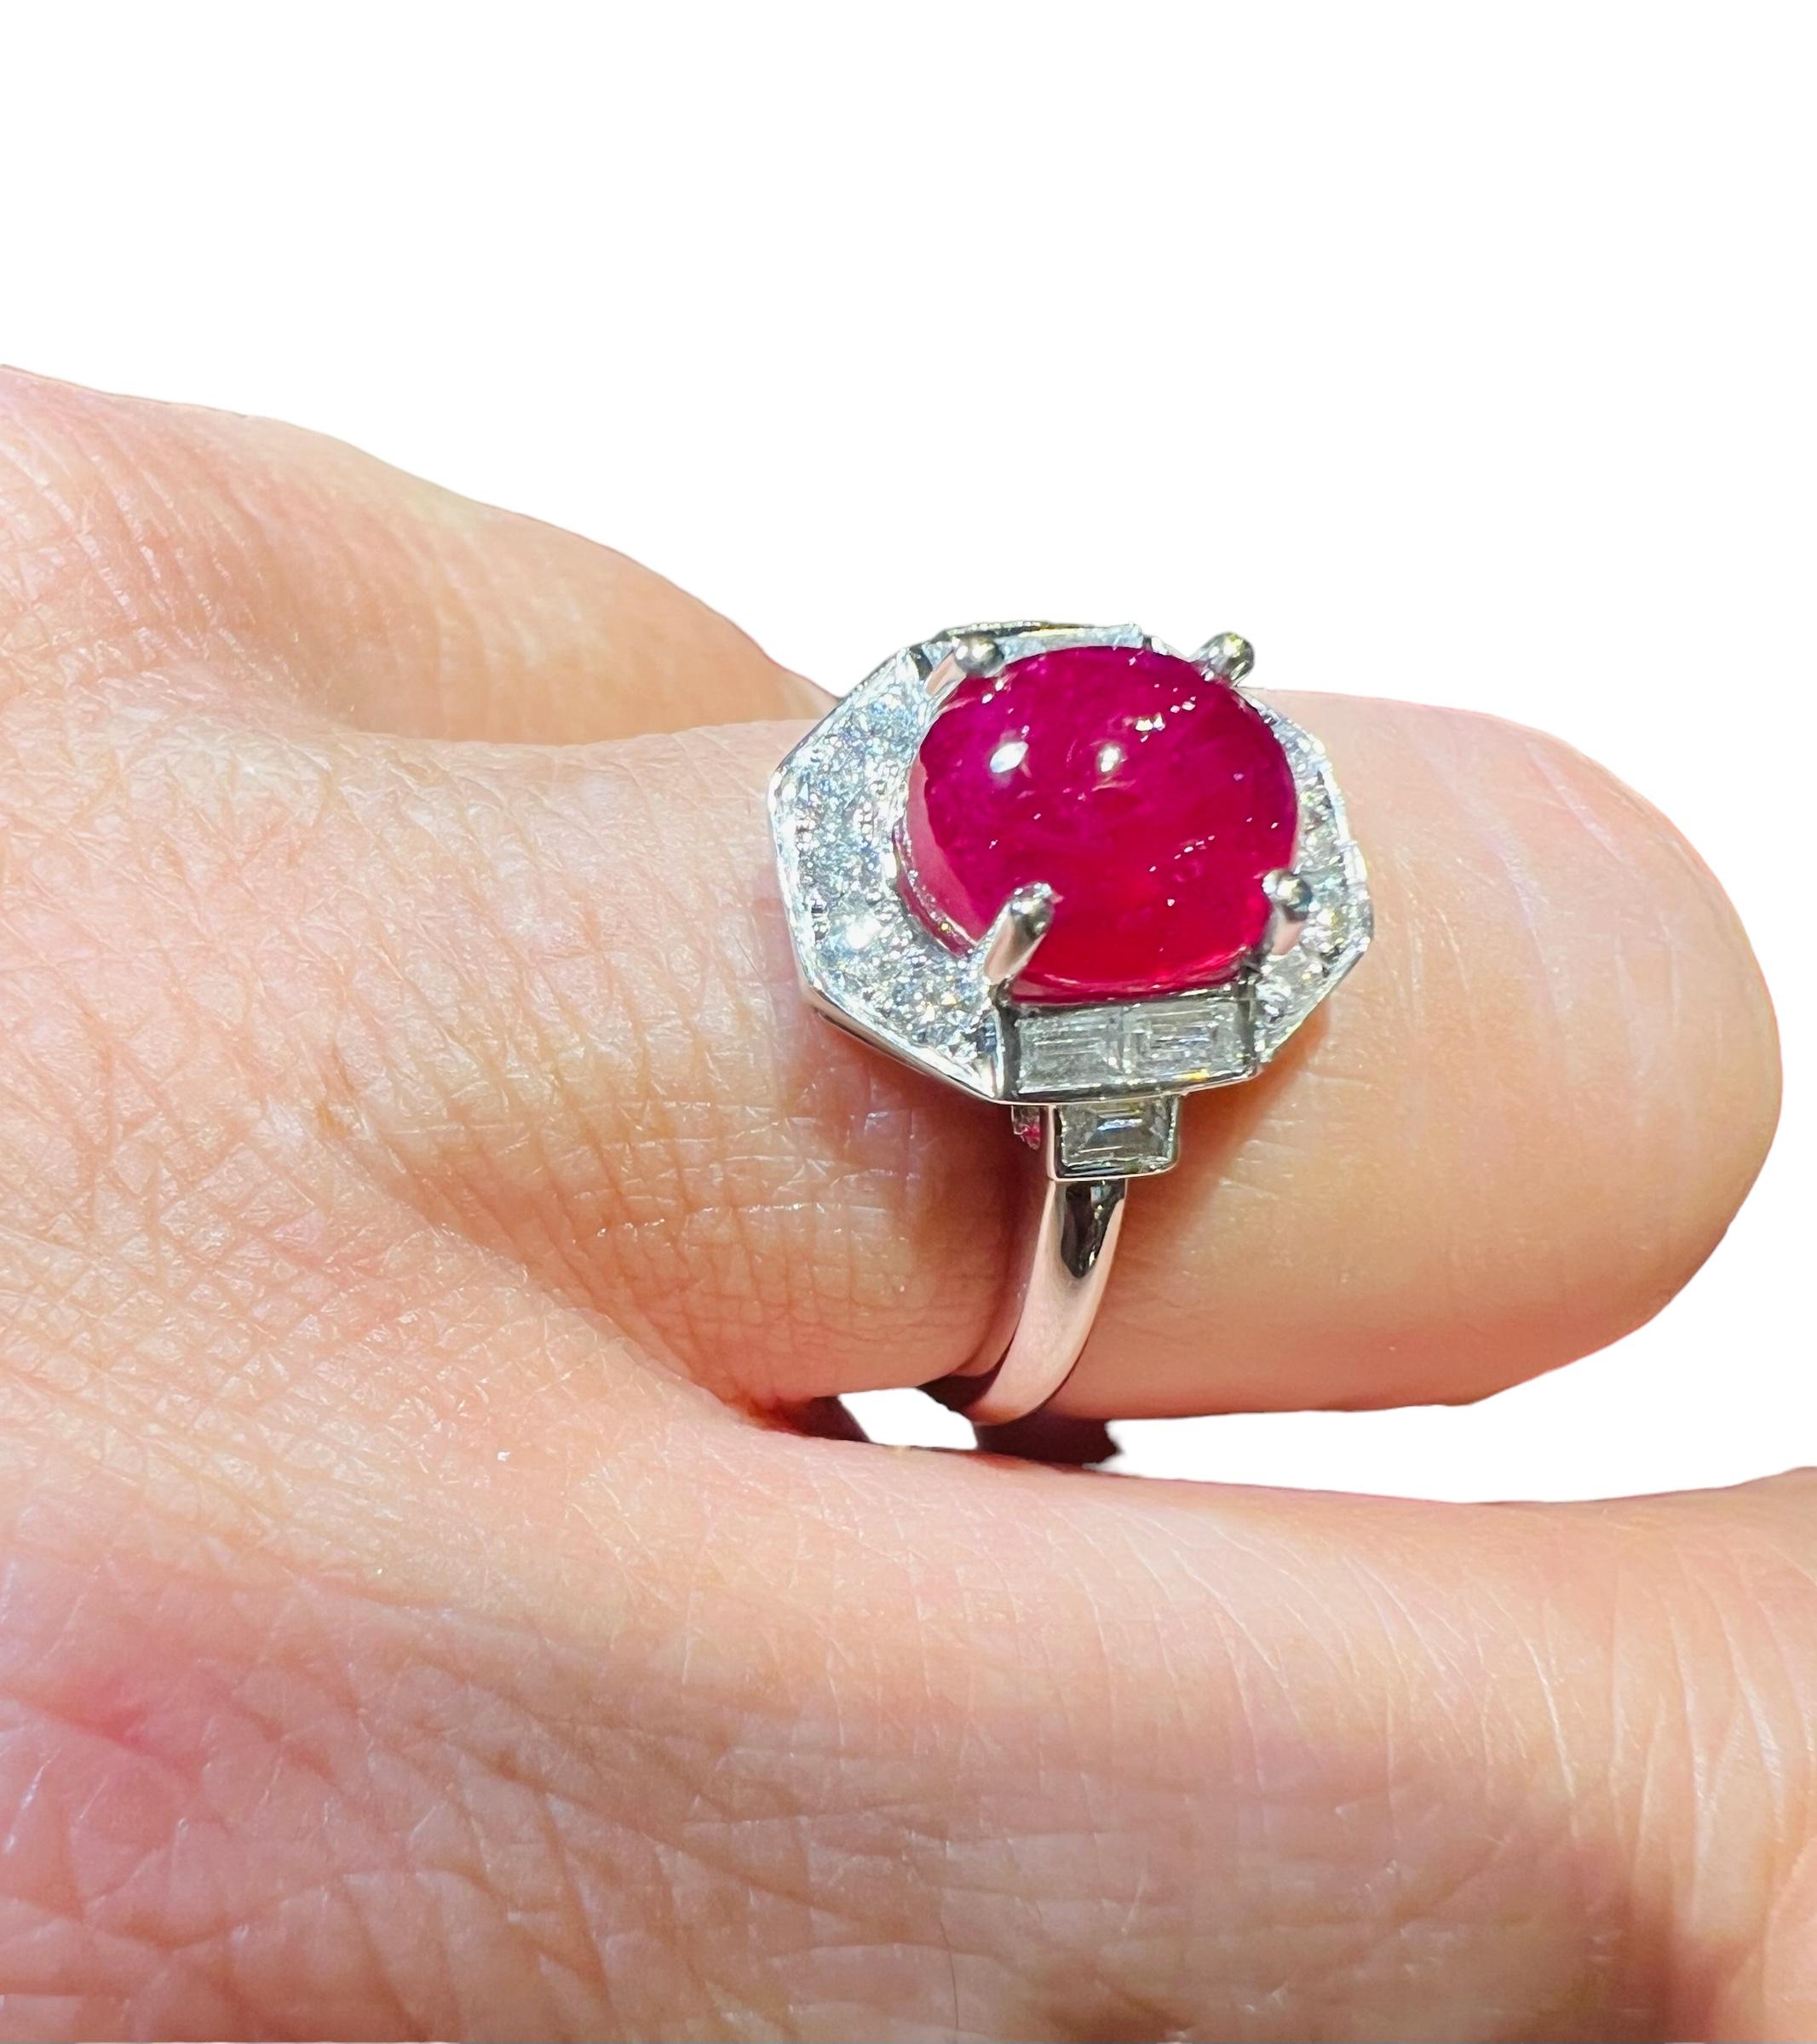 18 Carat Gold Ring Set With A Ruby Cabochon Surrounded By Diamonds 2